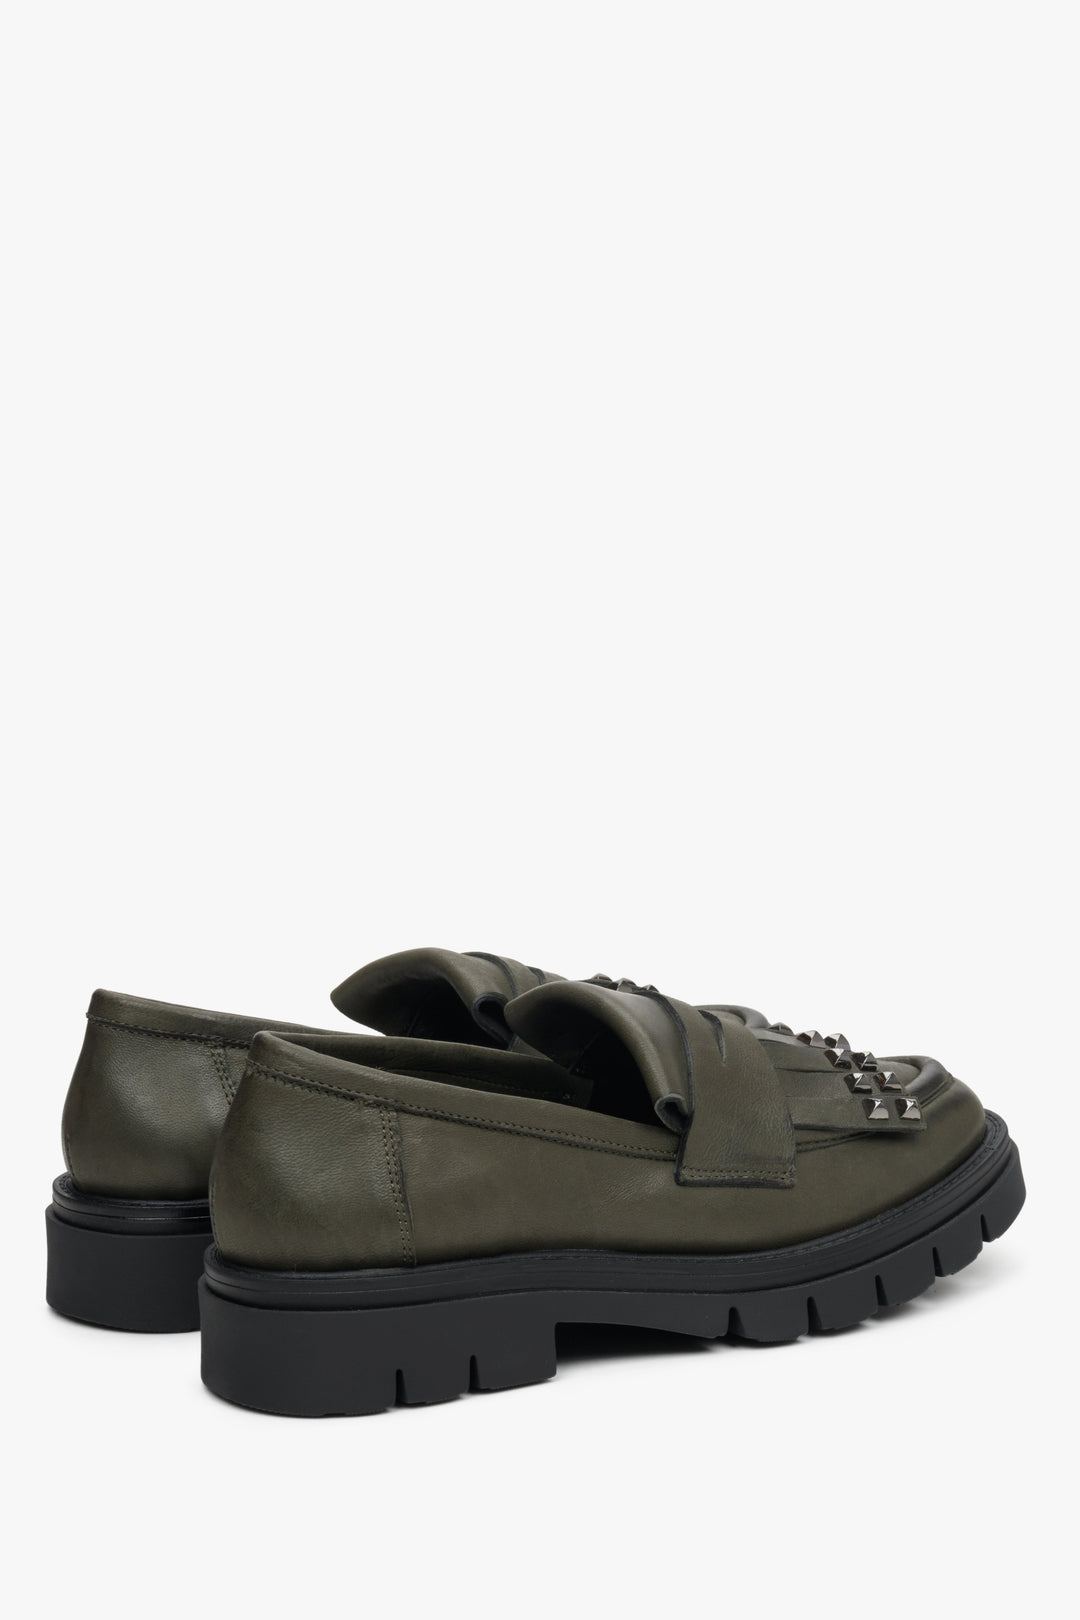 Women's dark green Estro moccasins - close-up on the heel and side line of the shoe.